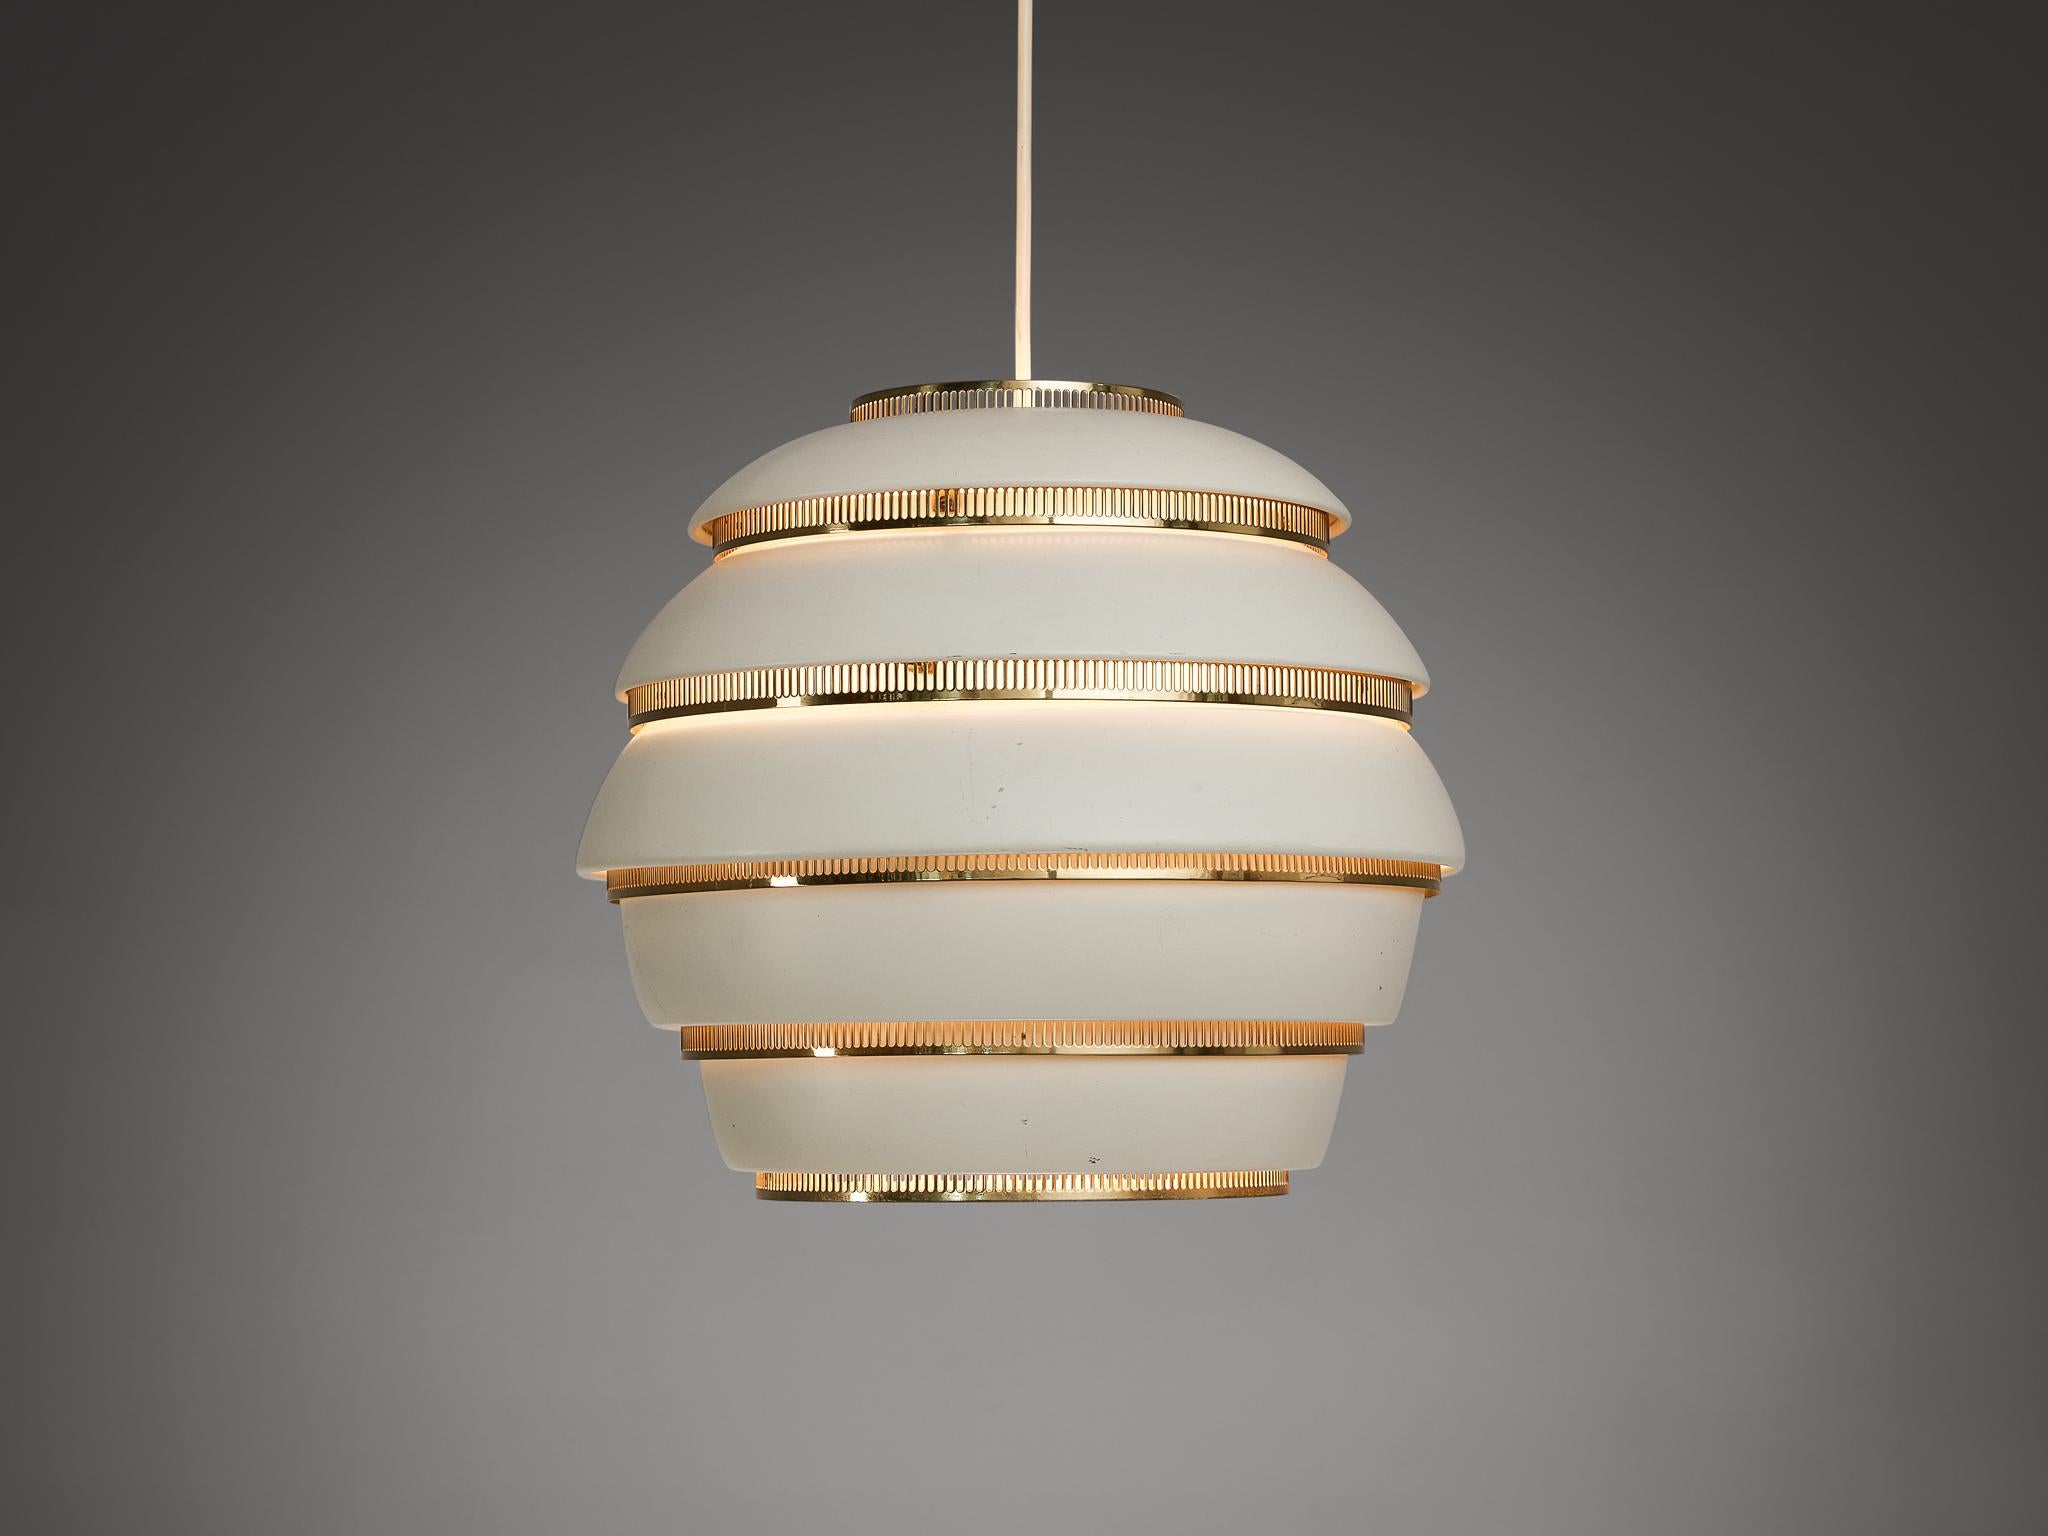 Alvar Aalto for Valaisinpaja Oy, pendant lamp 'Beehive' model A331, metal, brass, Finland, 1953.

The pendant lamp model A331 by Alvar Aalto carries the nickname 'Beehive' since its shape awakes the association of a structure built by bees. Five